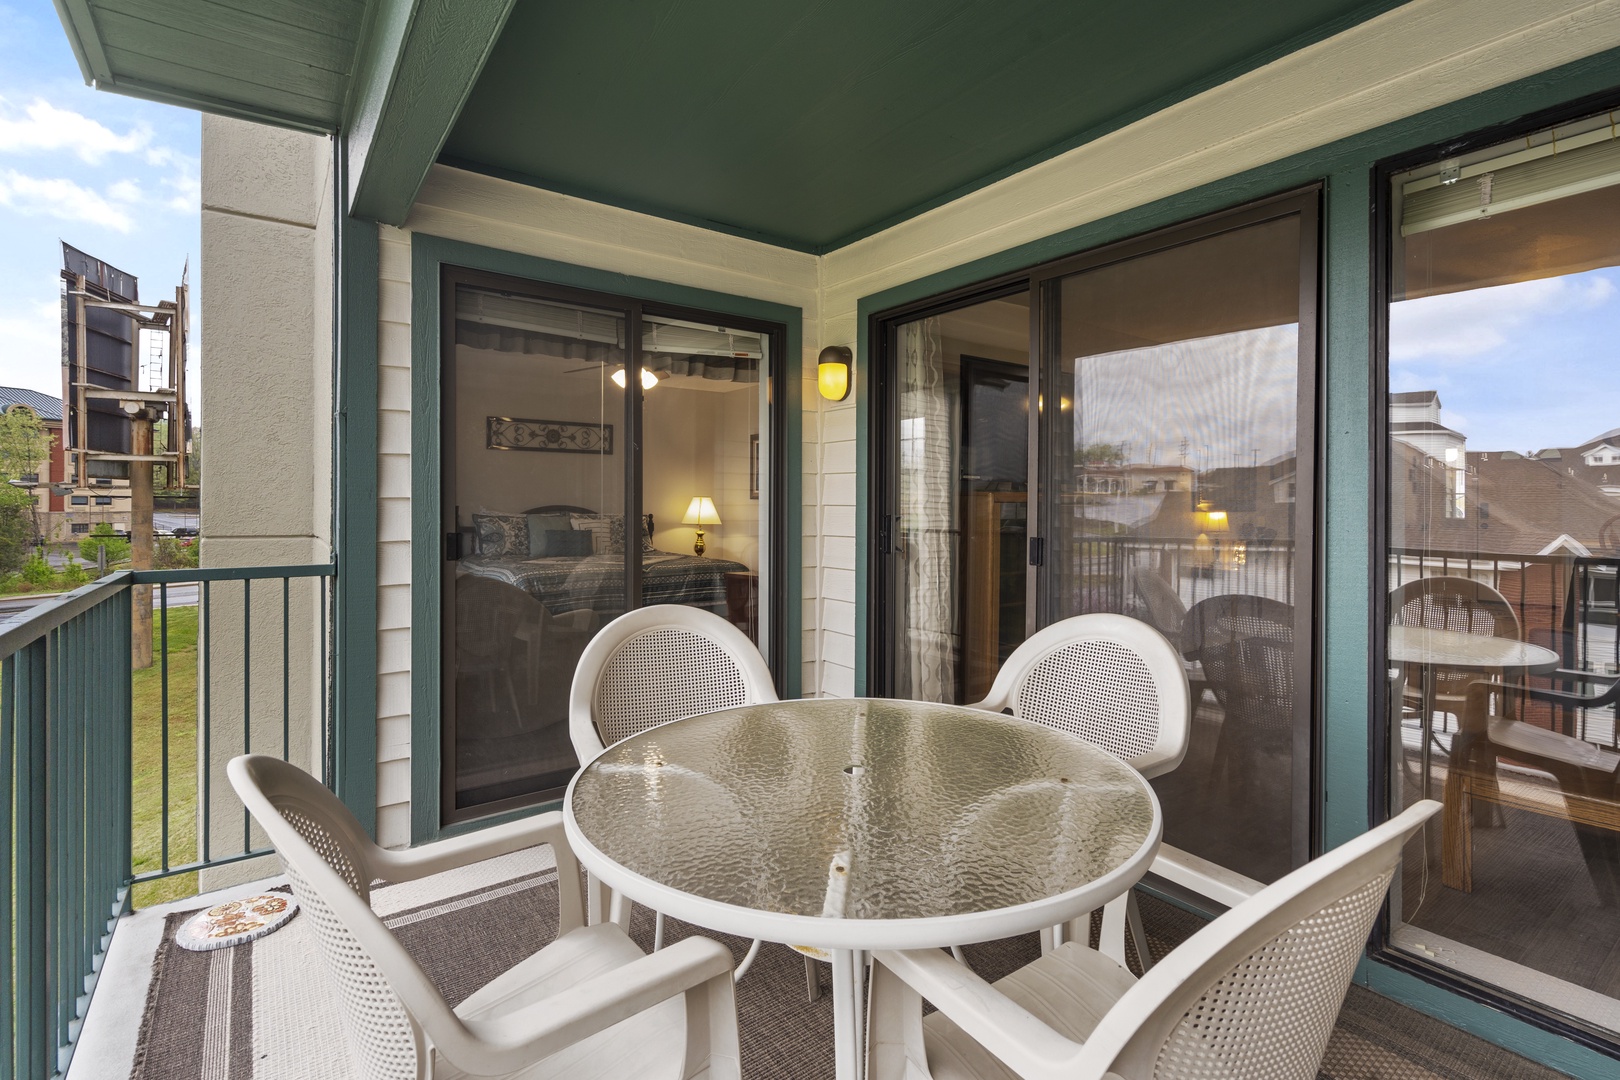 Balcony with outdoor dining for 4